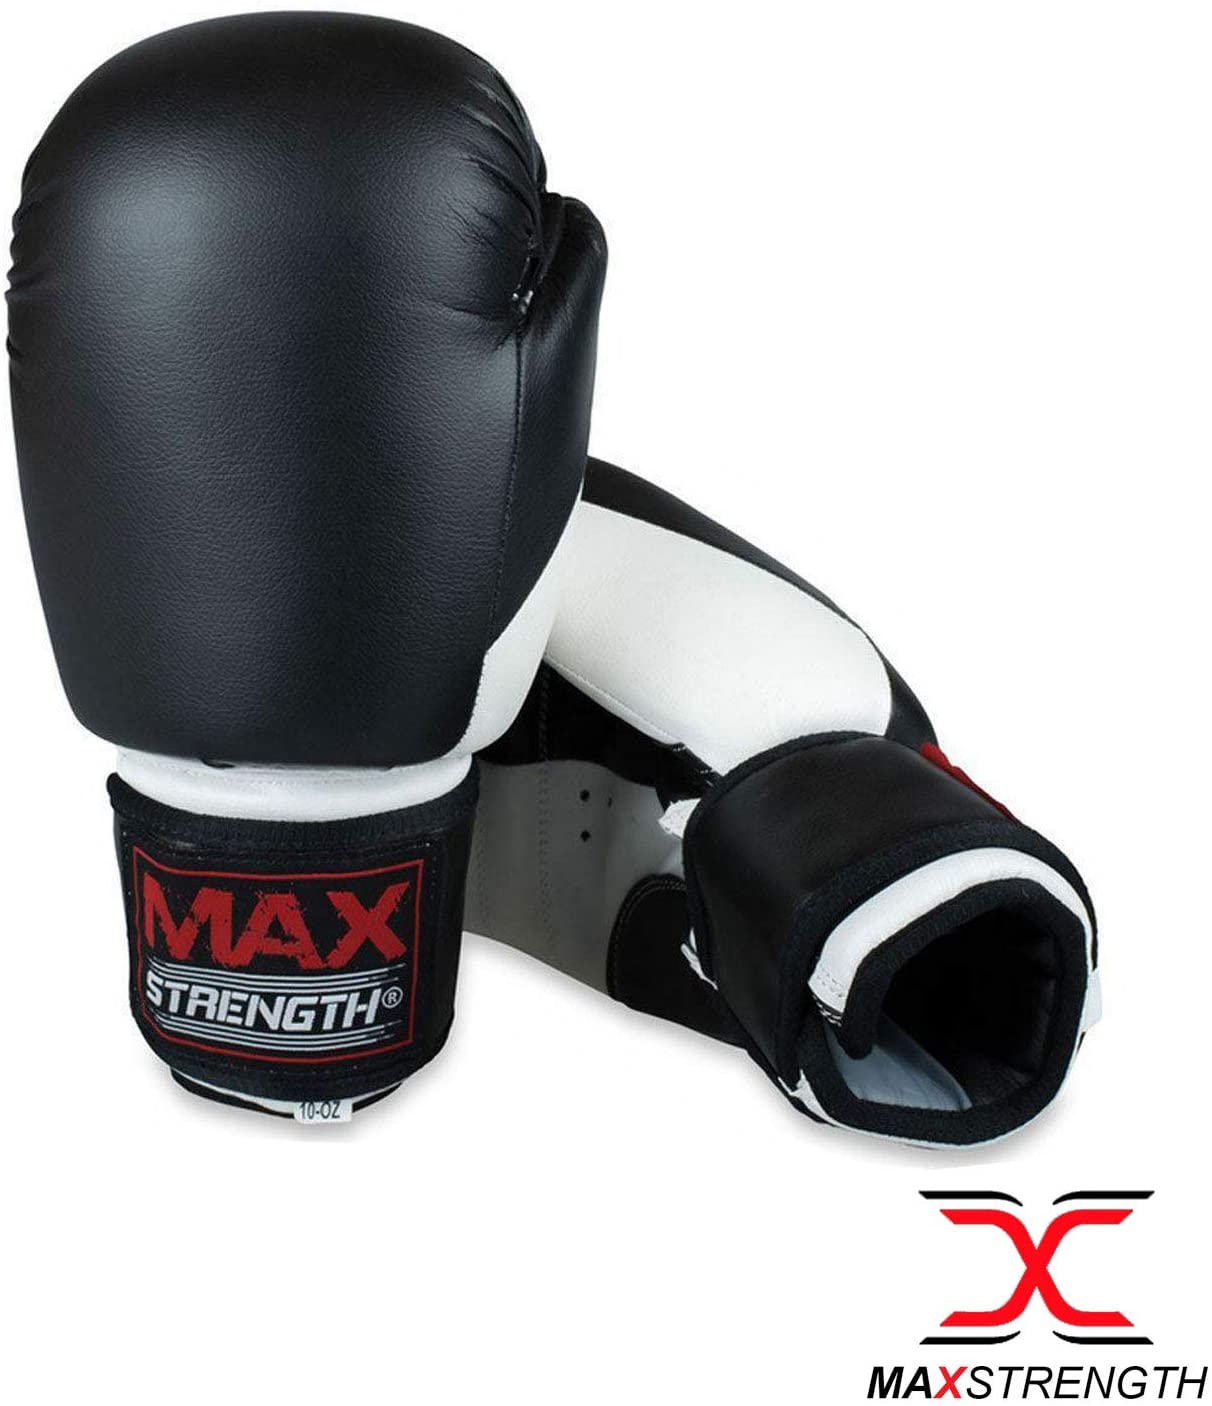 Buy Max Strength Boxing Gloves Sparring Kickboxing Mma Muay Thai Boxing Training Workout Gloves 14oz Online in UAE Sharaf DG